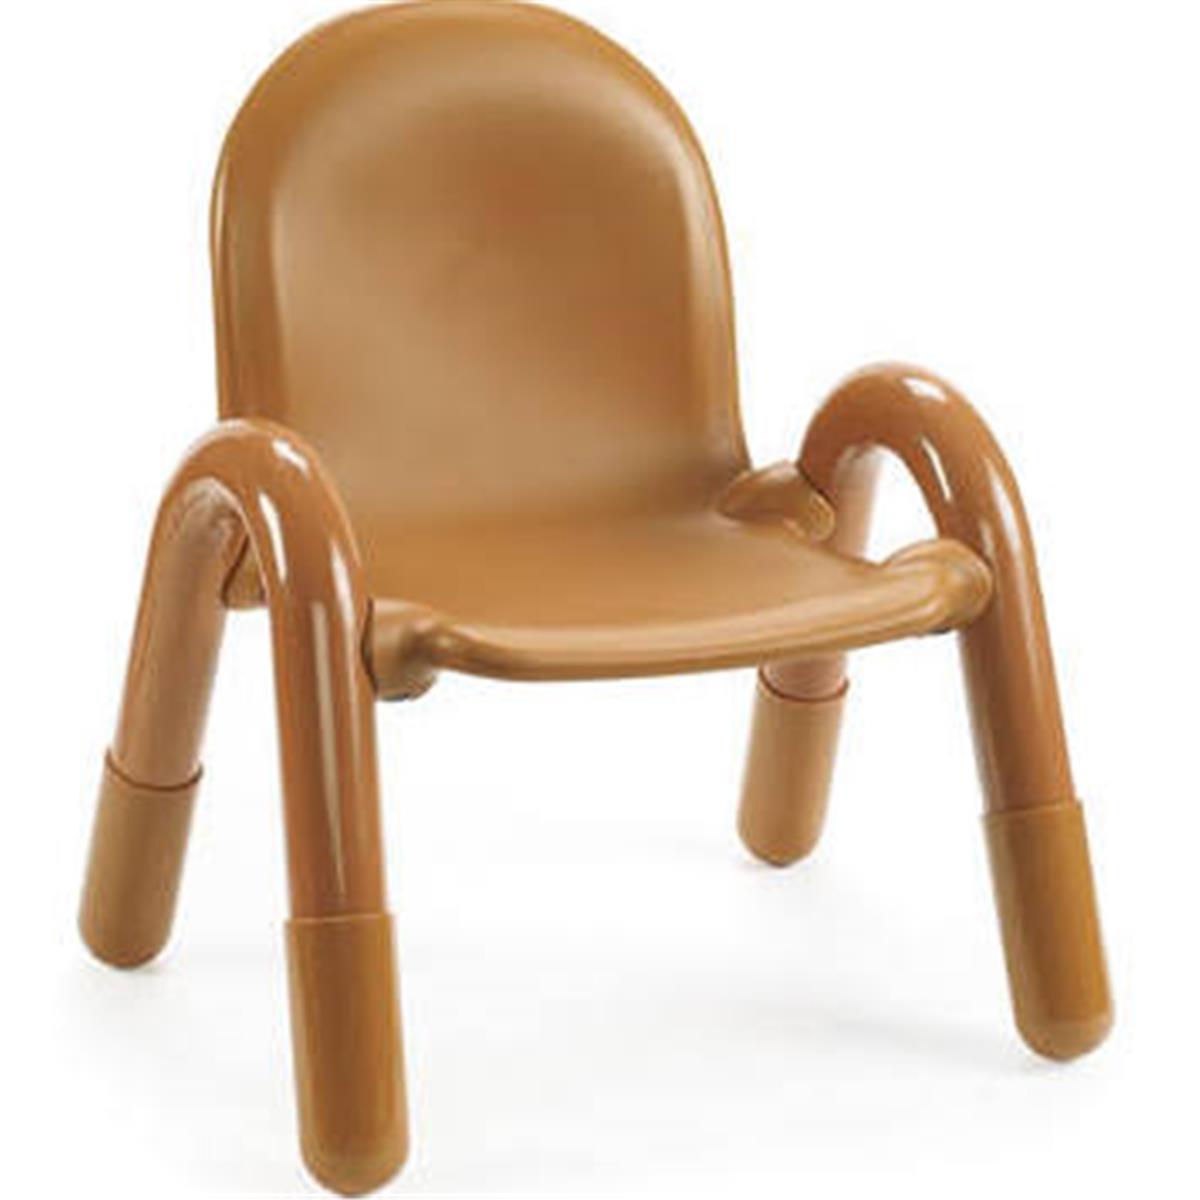 Angeles Ab7905nw 5 In. Baseline Plastic Classroom Chair, Natural